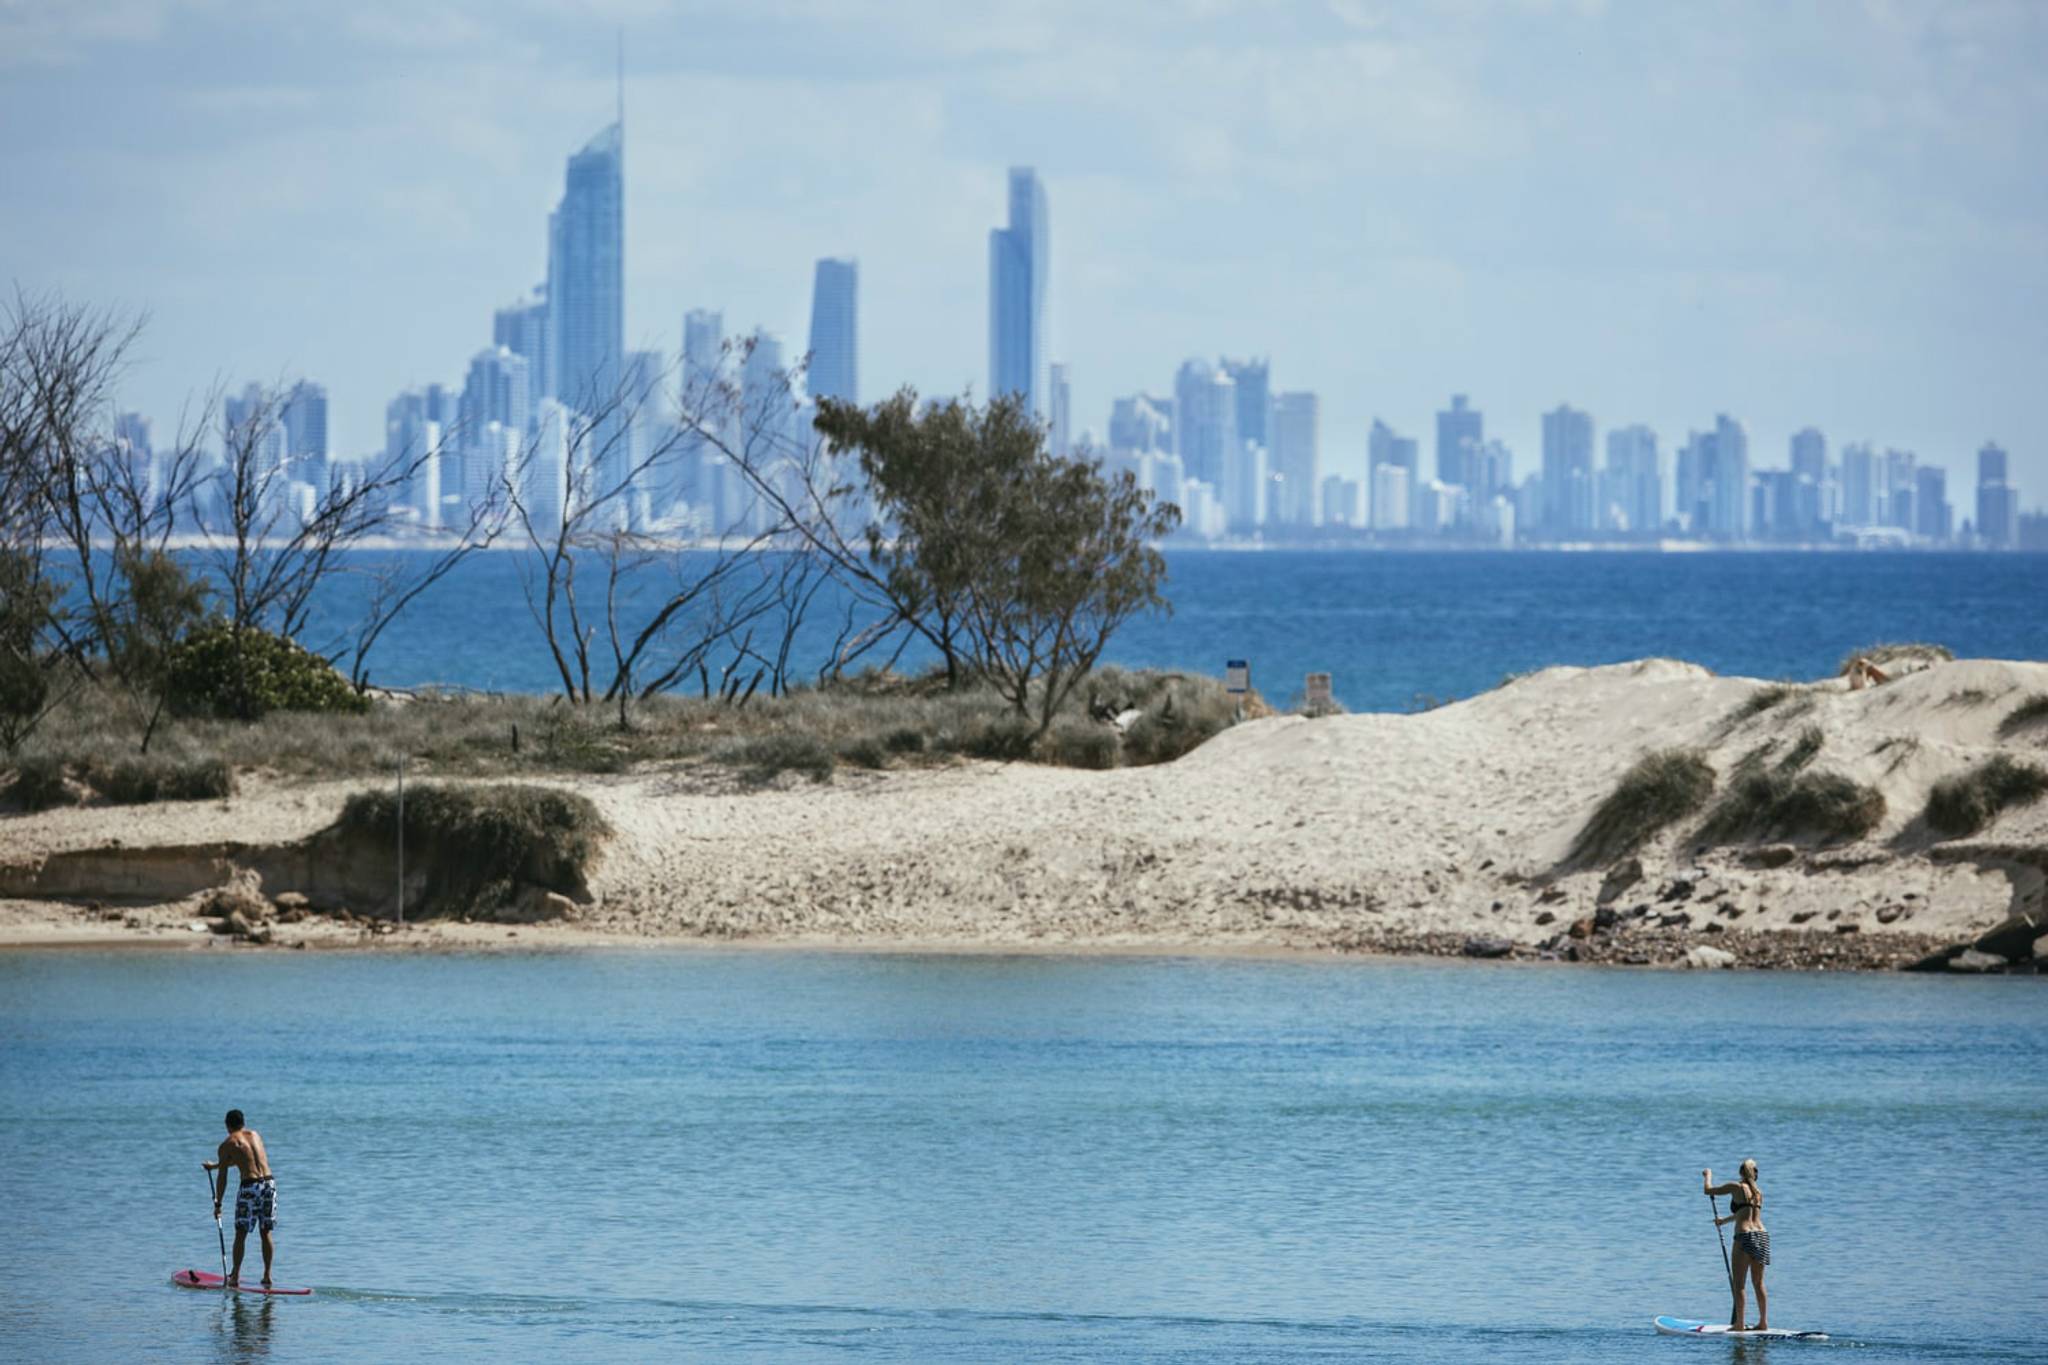 Queensland lures tourists with bespoke trip planner